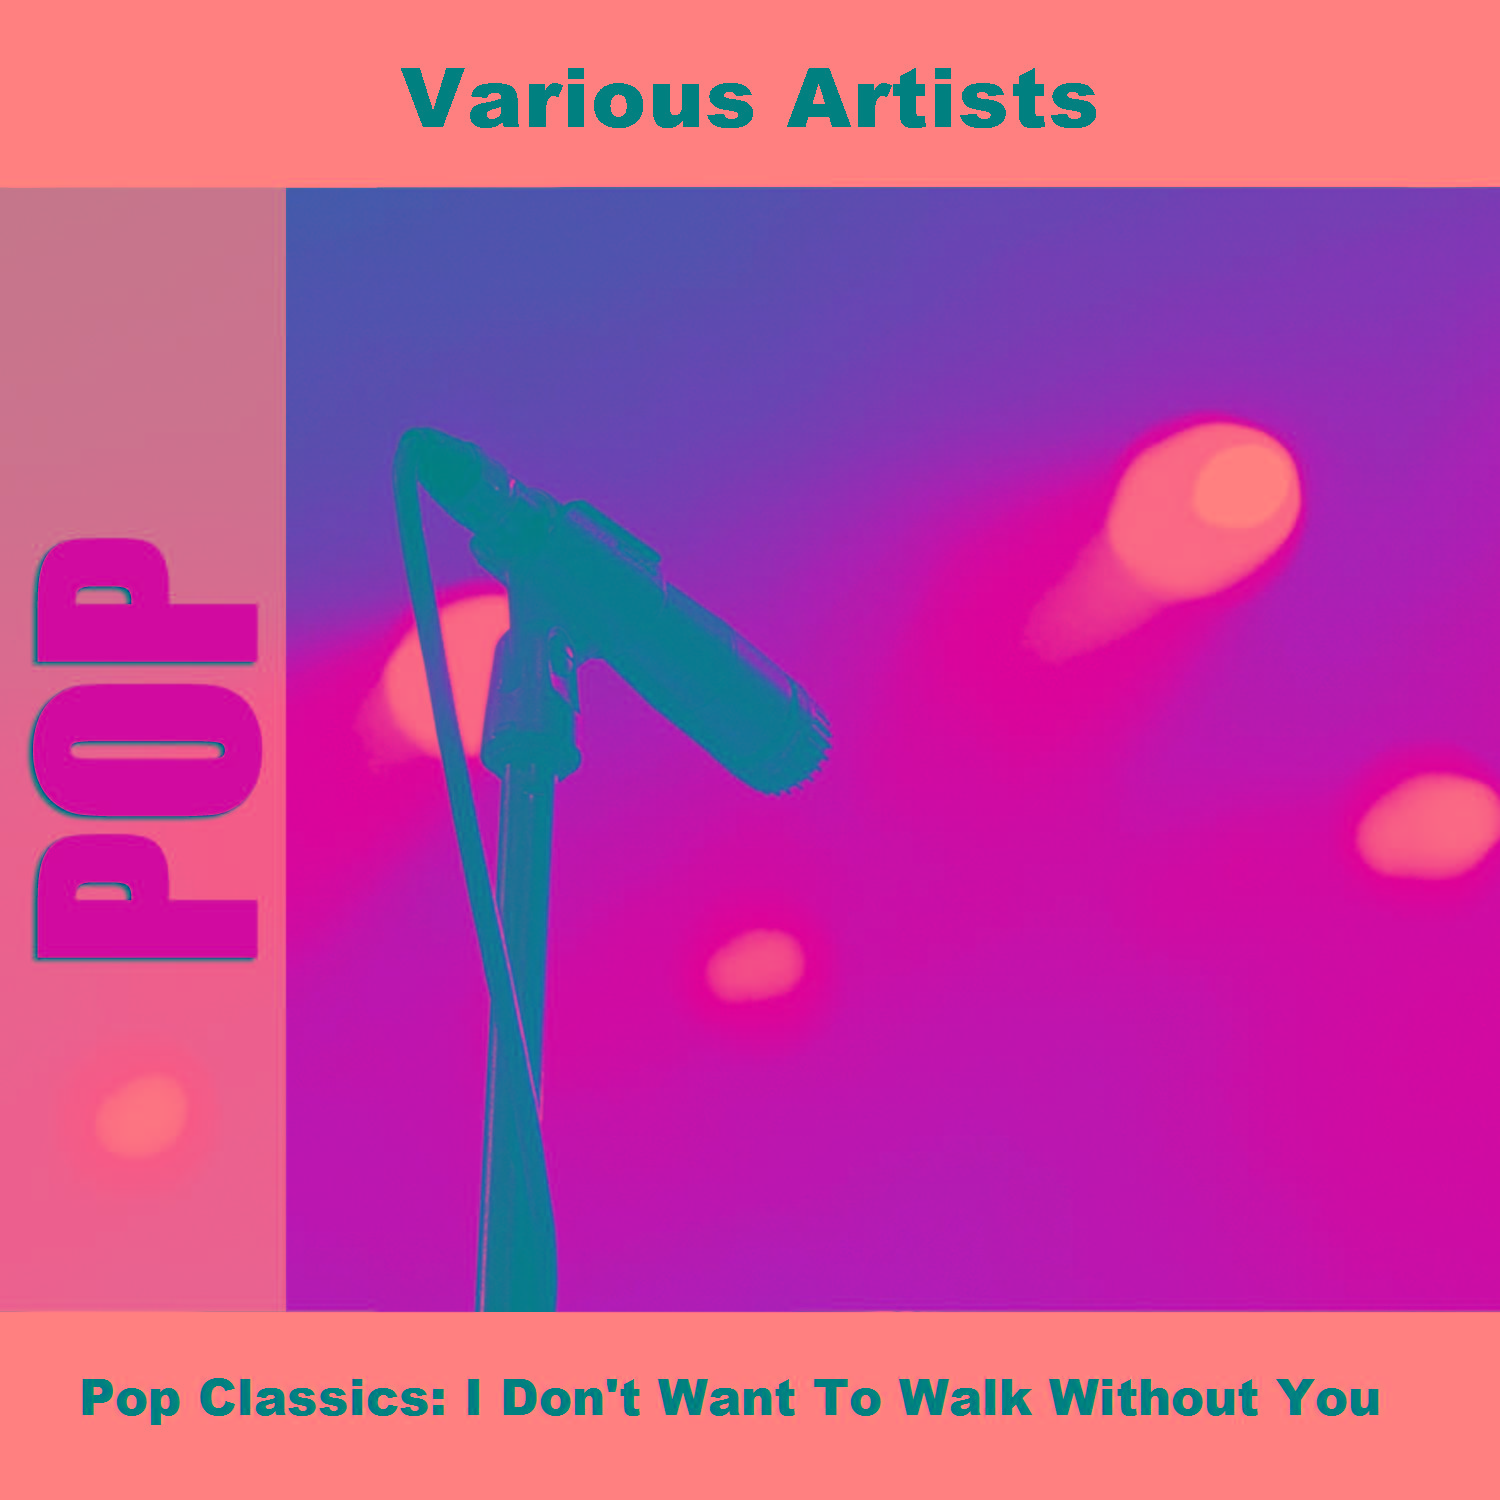 Pop Classics: I Don't Want To Walk Without You